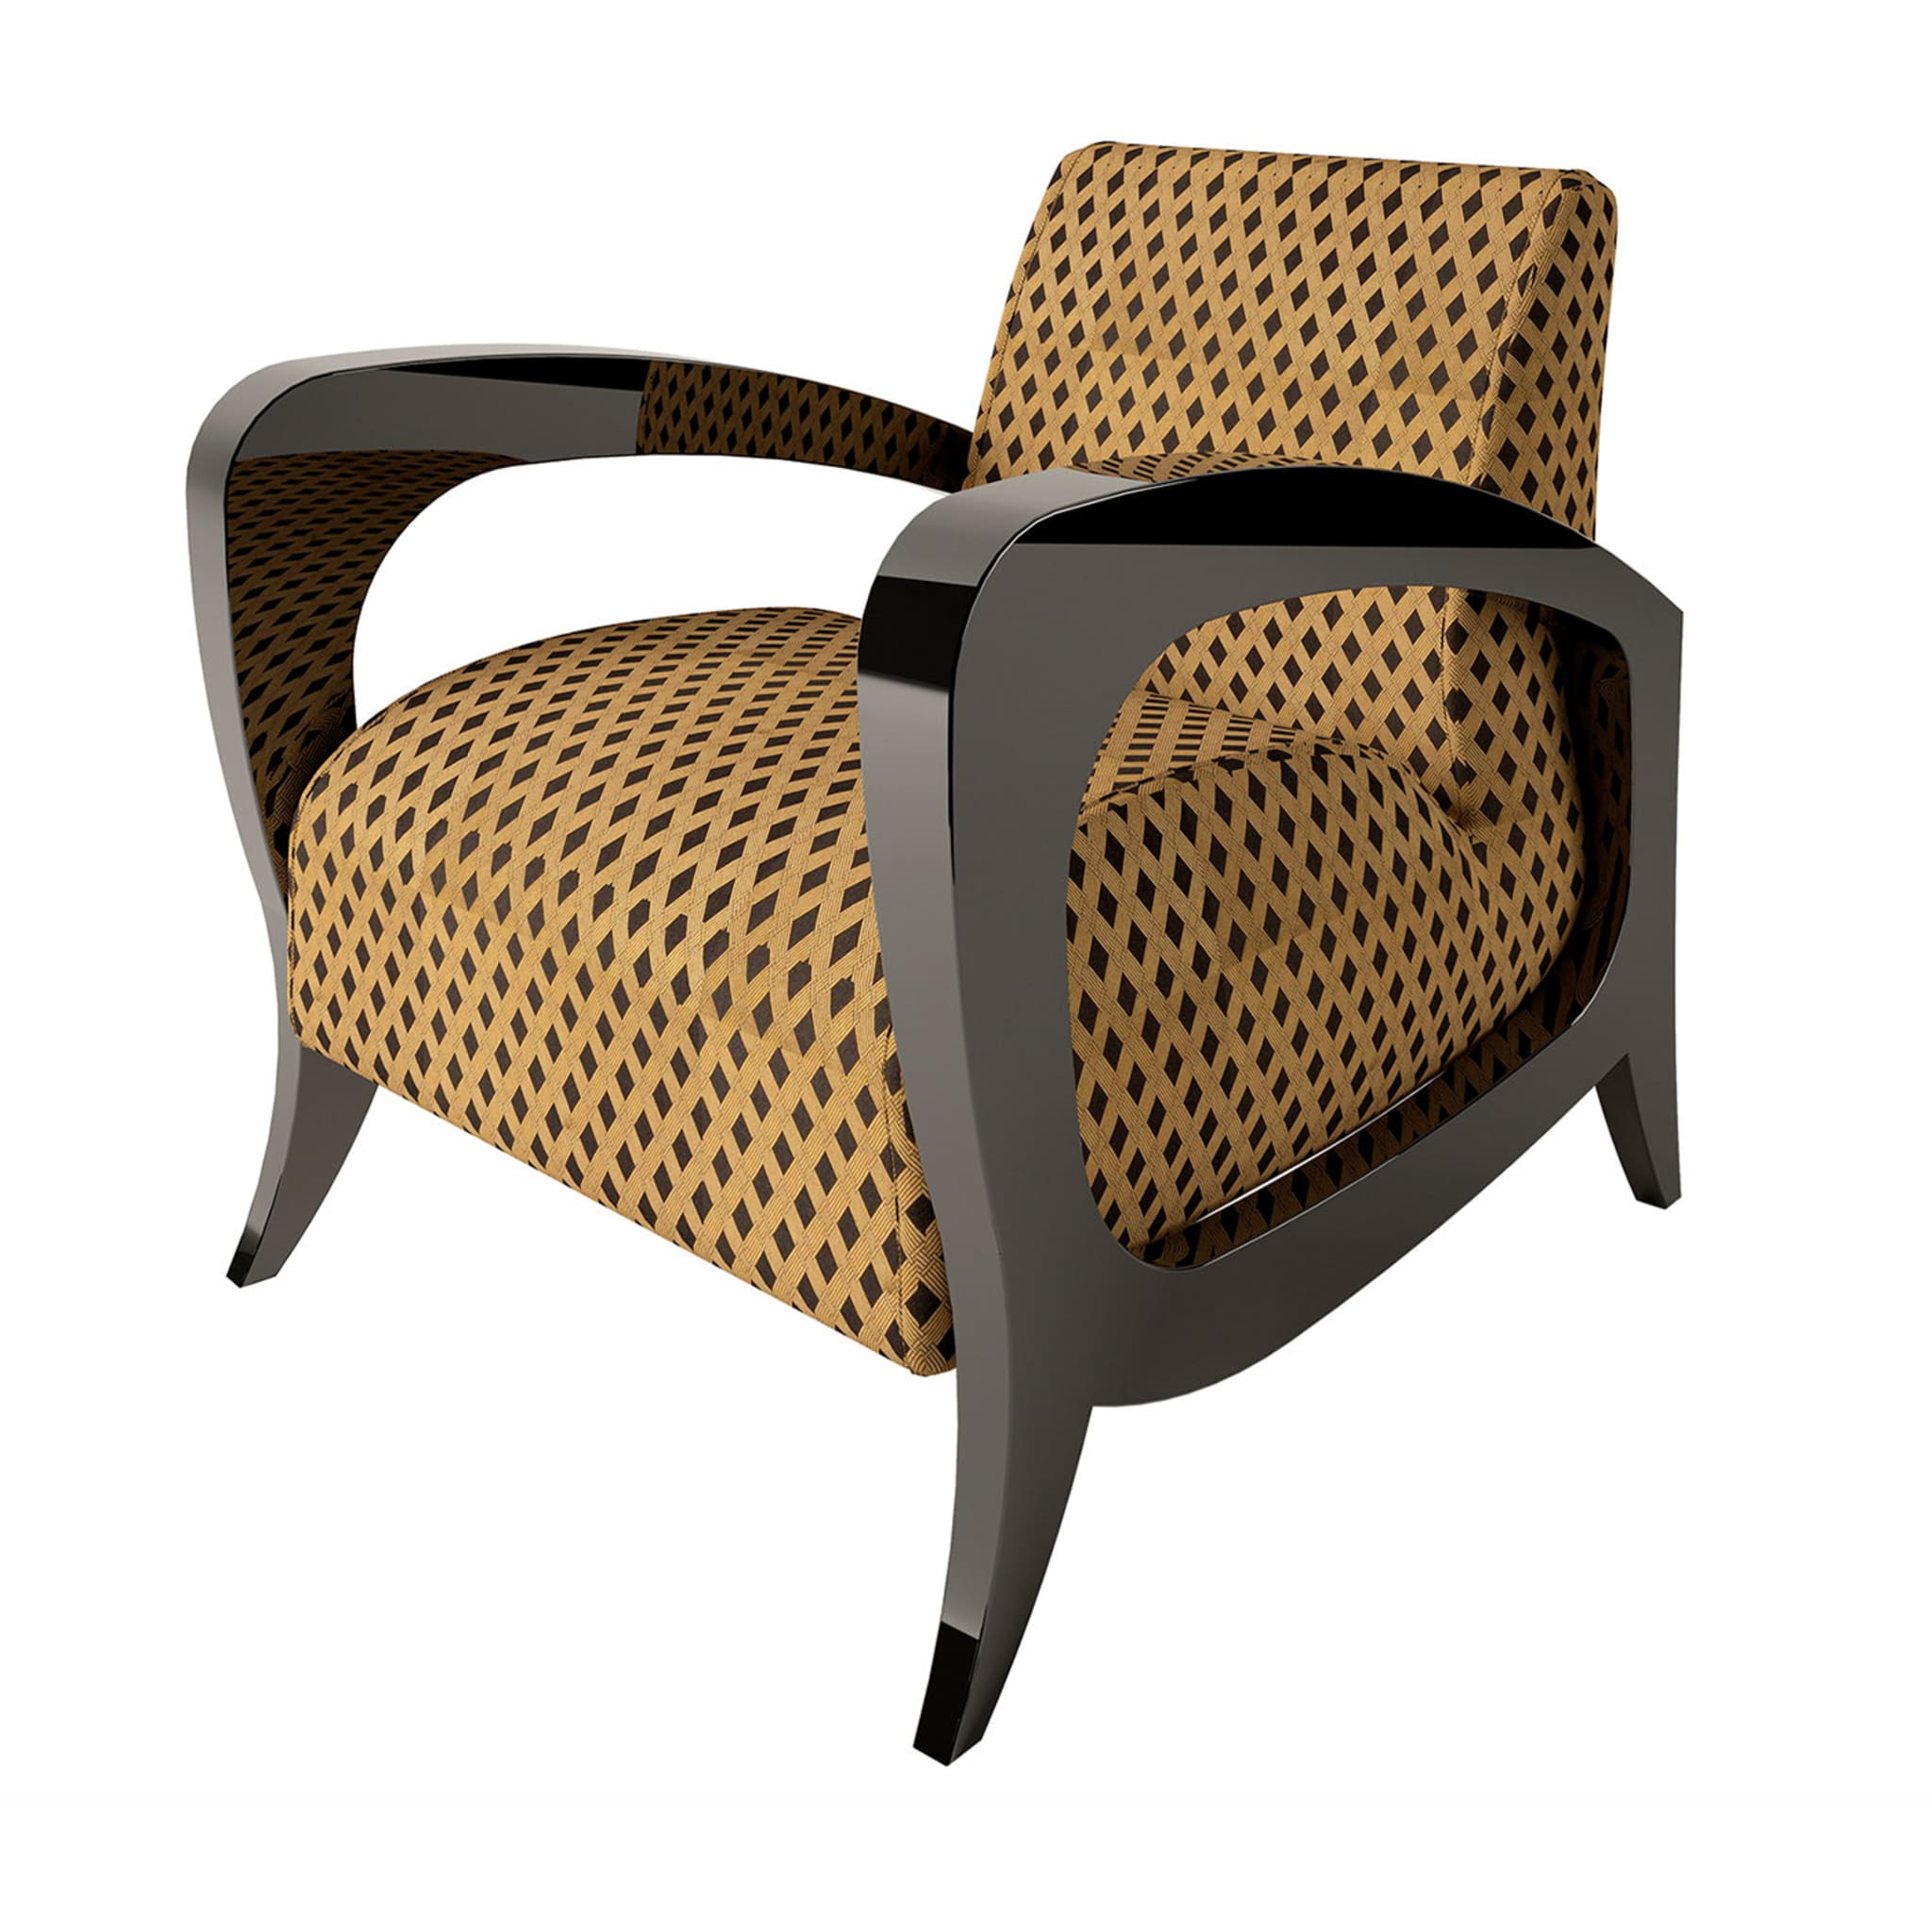 Shelly Black and Yellow Armchair by Giannella Ventura - Alternative view 1